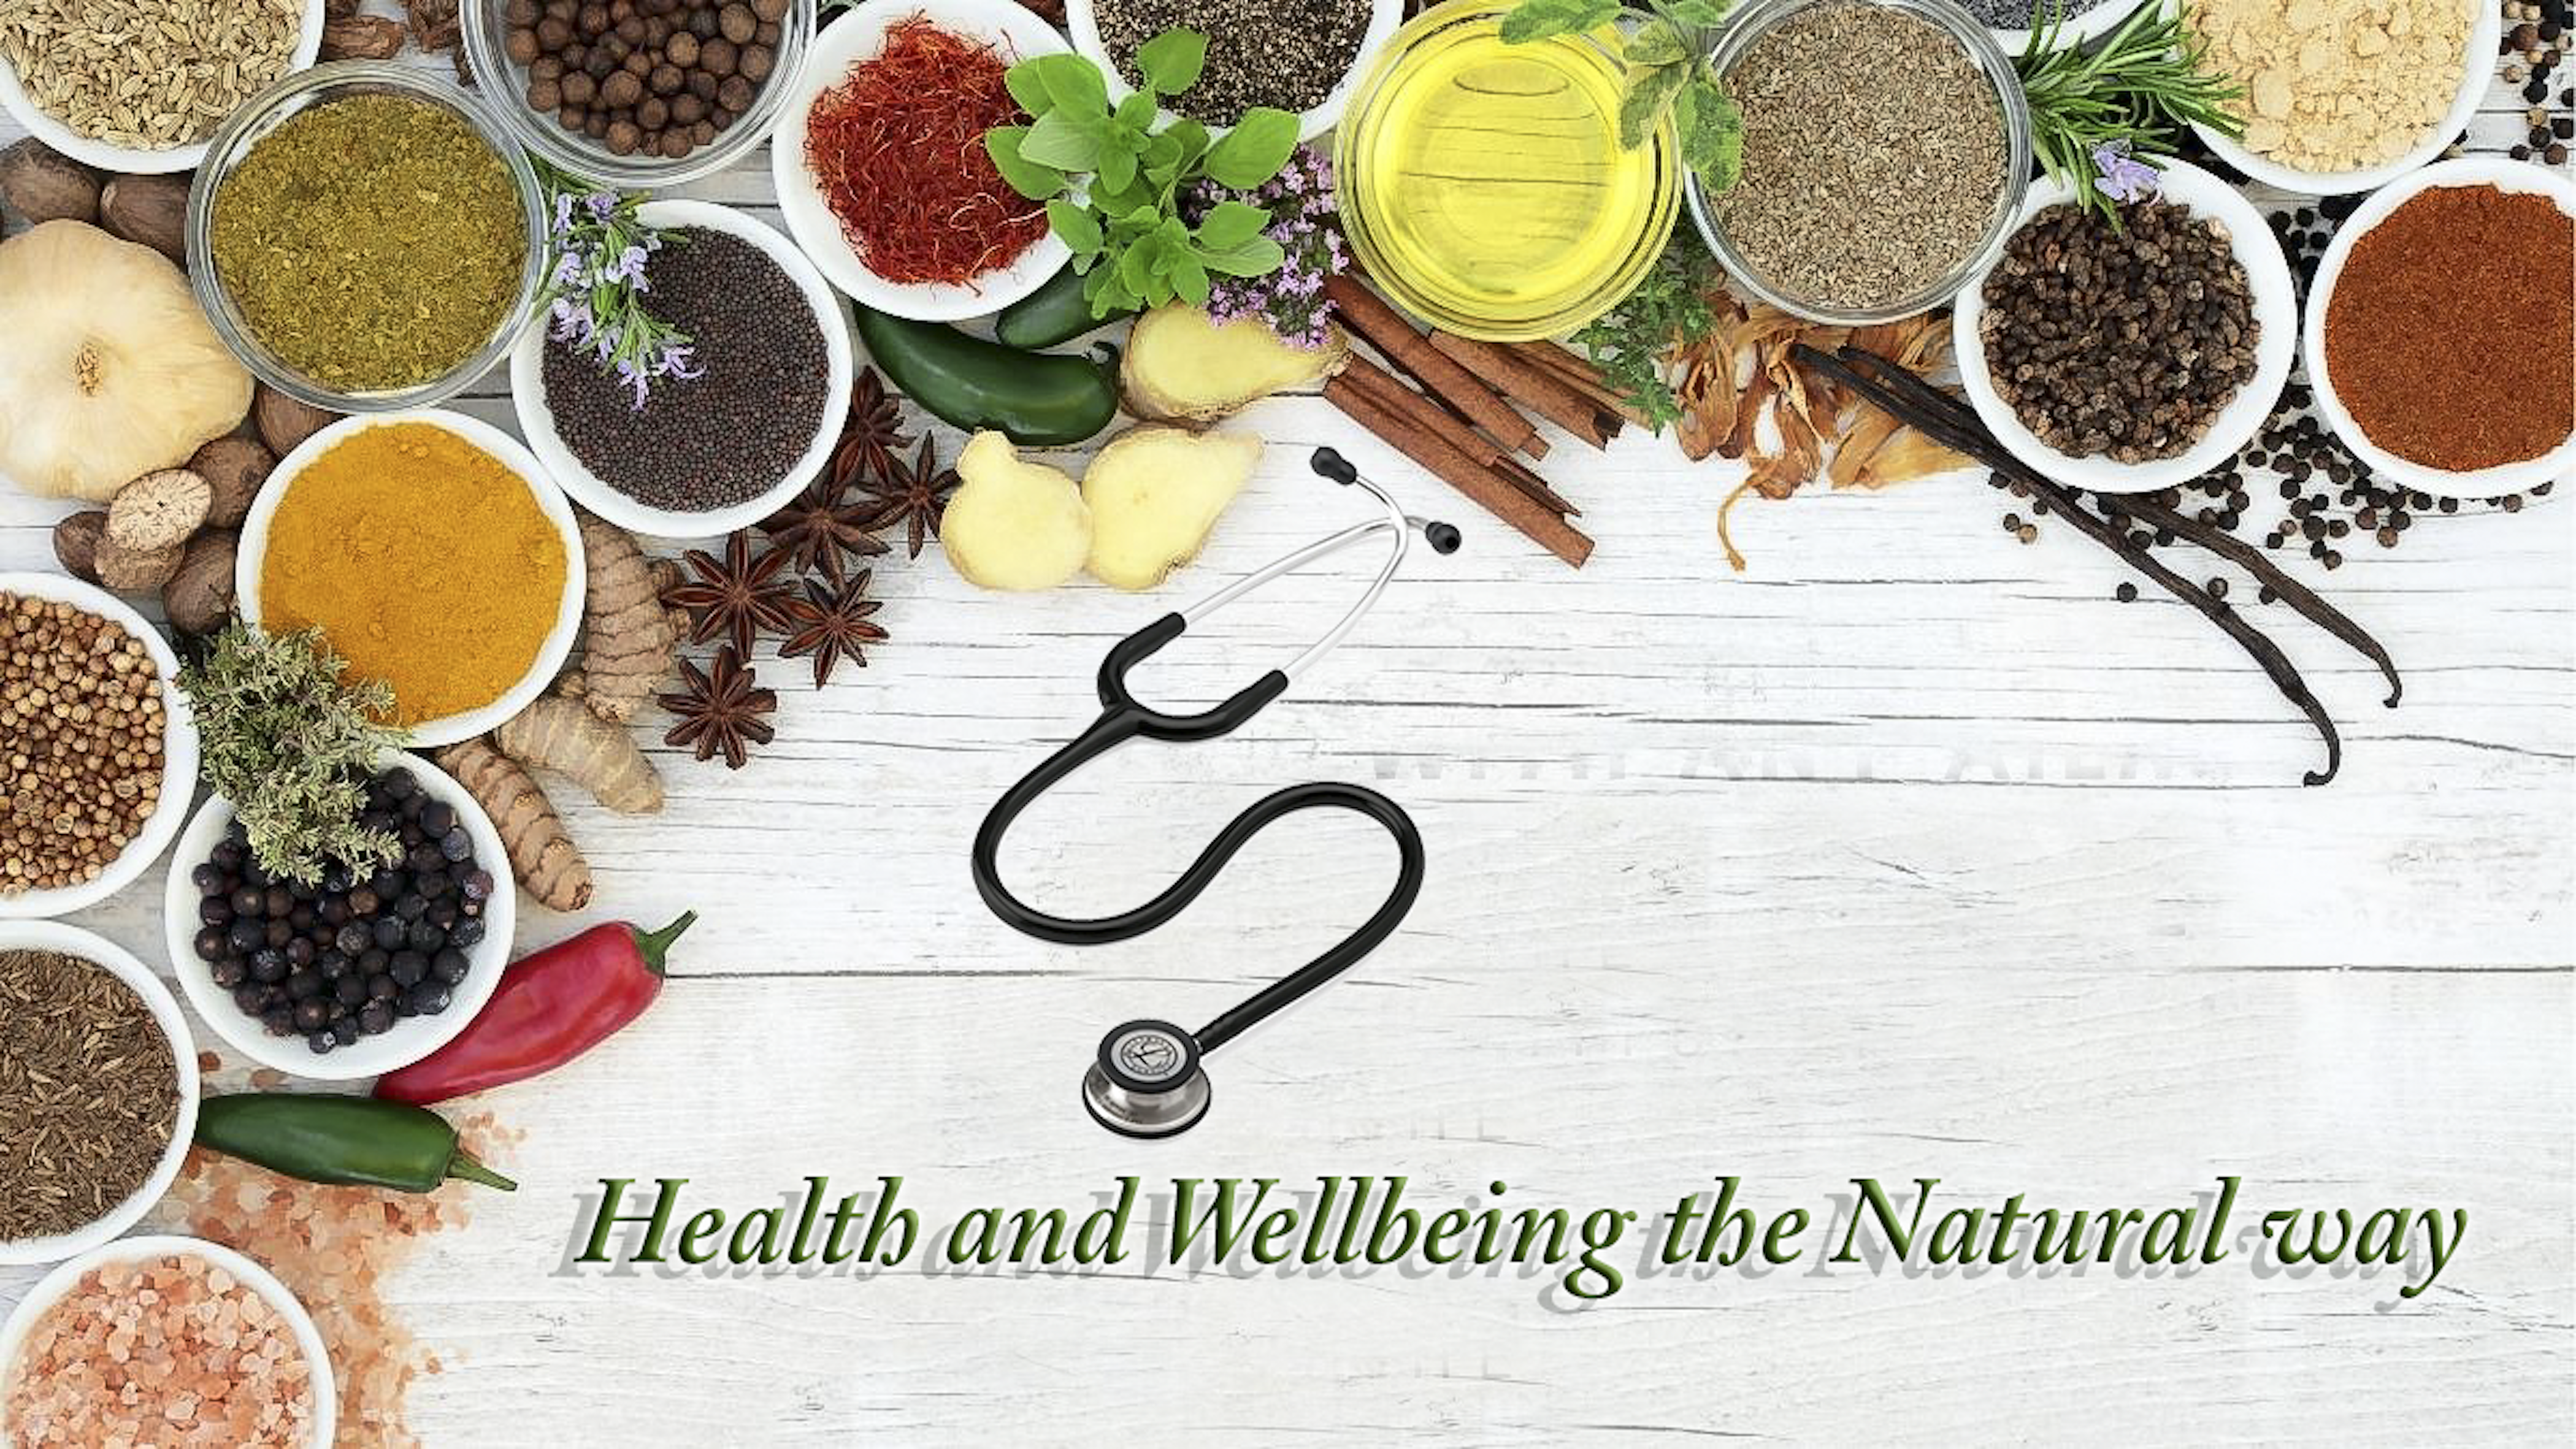 Science Based & Clinically Verified Natural Medicine